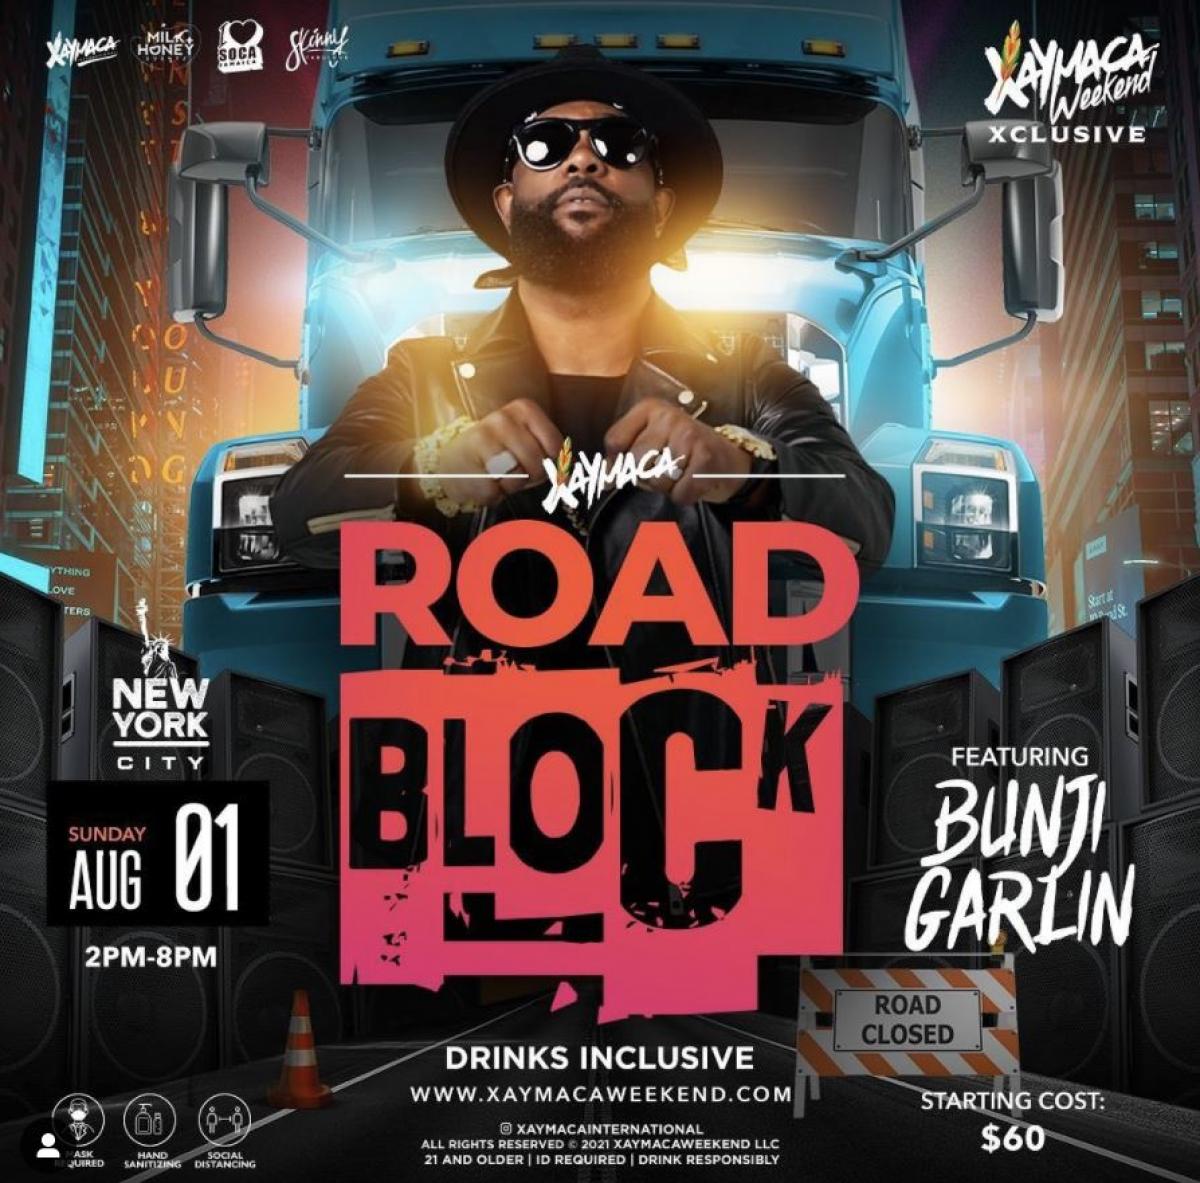 Road Block flyer or graphic.